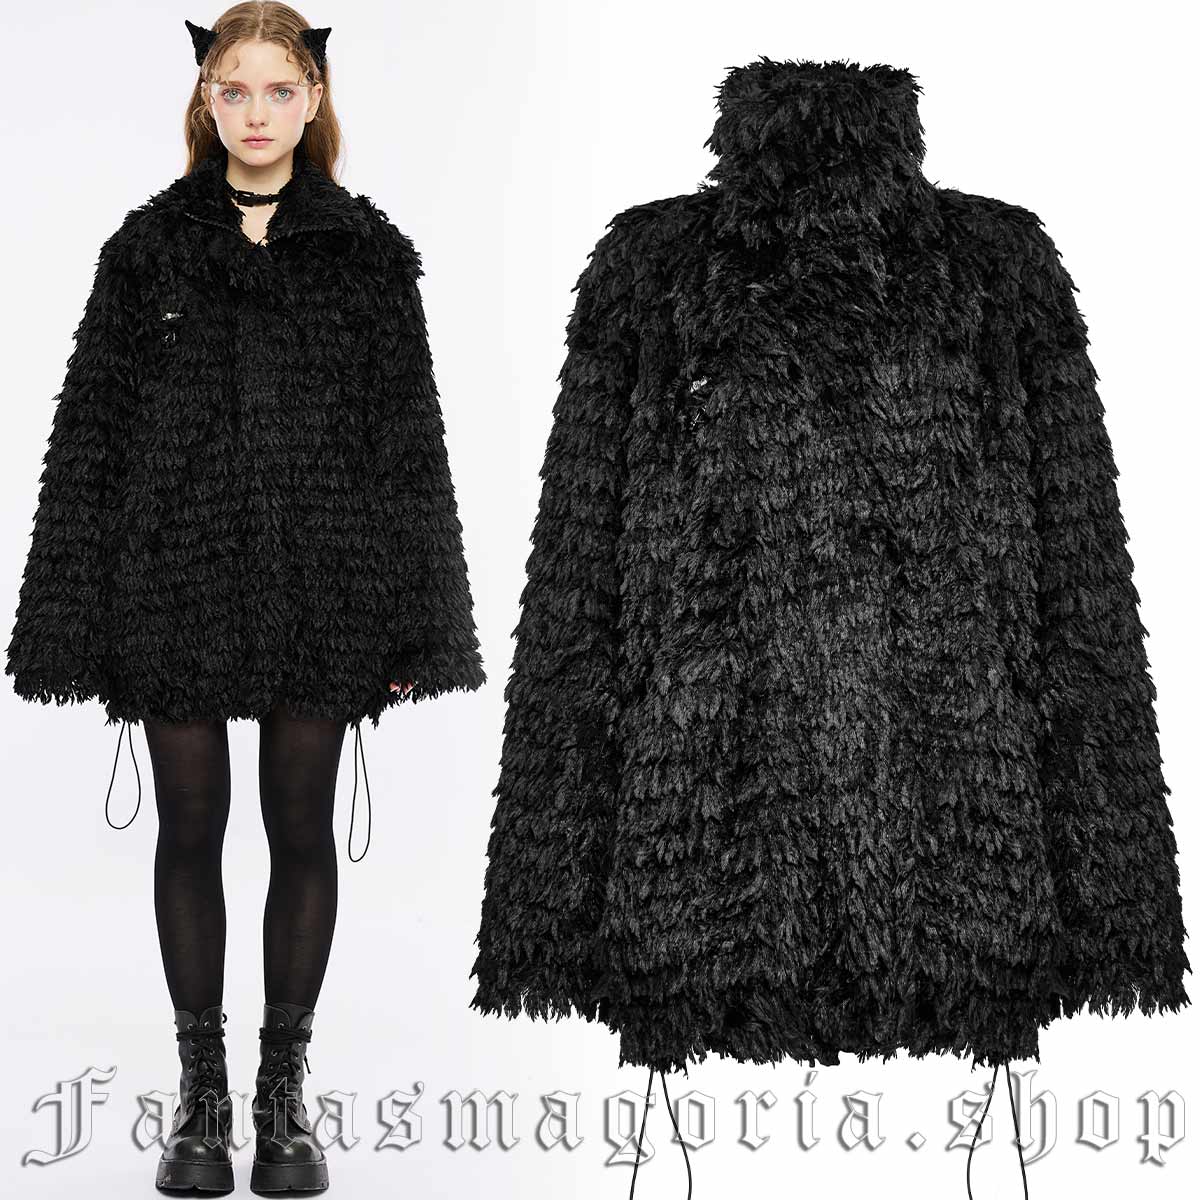 Women's Gothic black feather texture faux fur oversized loose fit high collar zip up jacket. - Punk Rave - OPY-720/BK